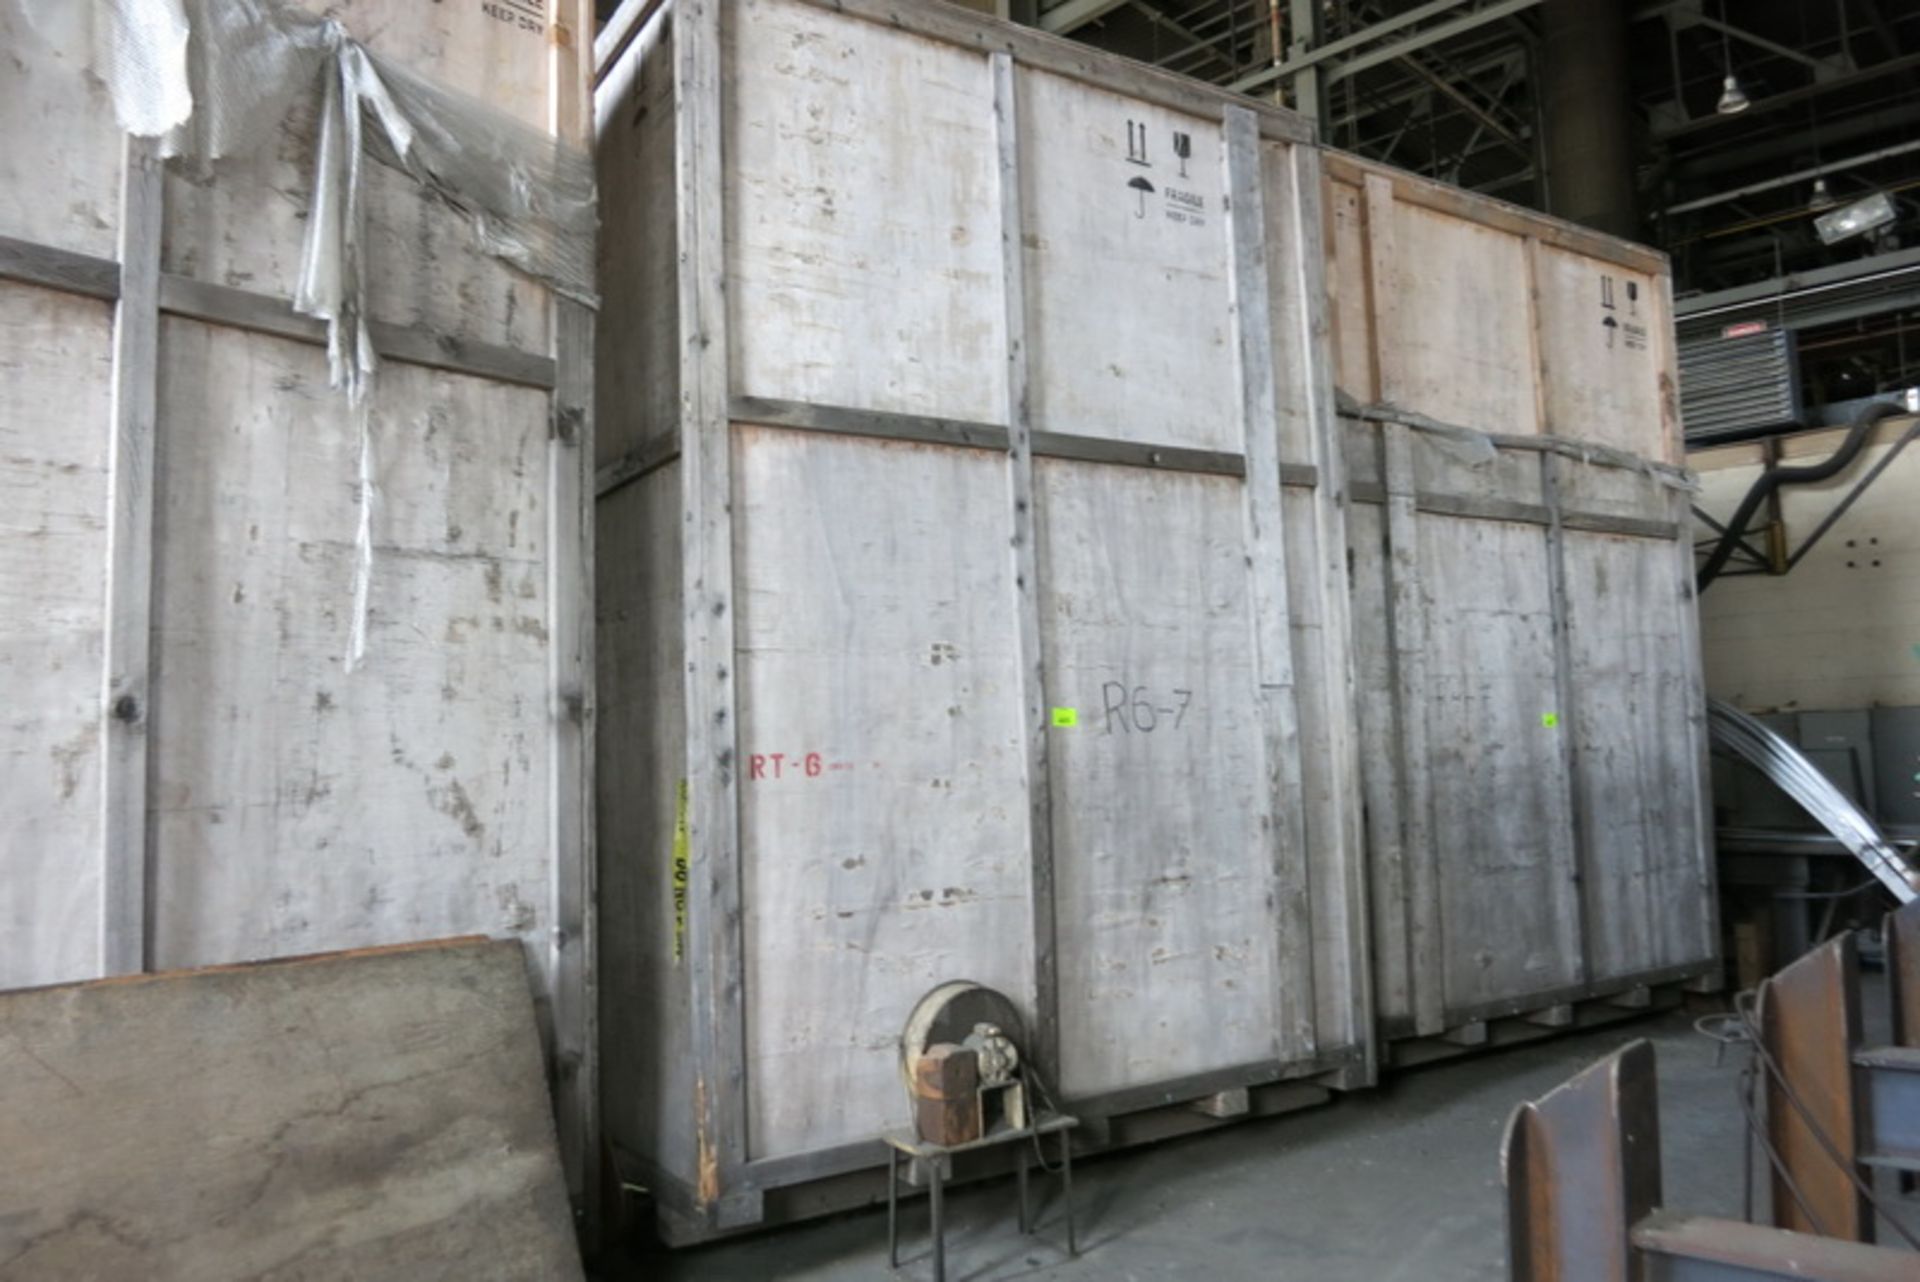 Power station switchgear, specs TBA (crated for shipping, never installed)